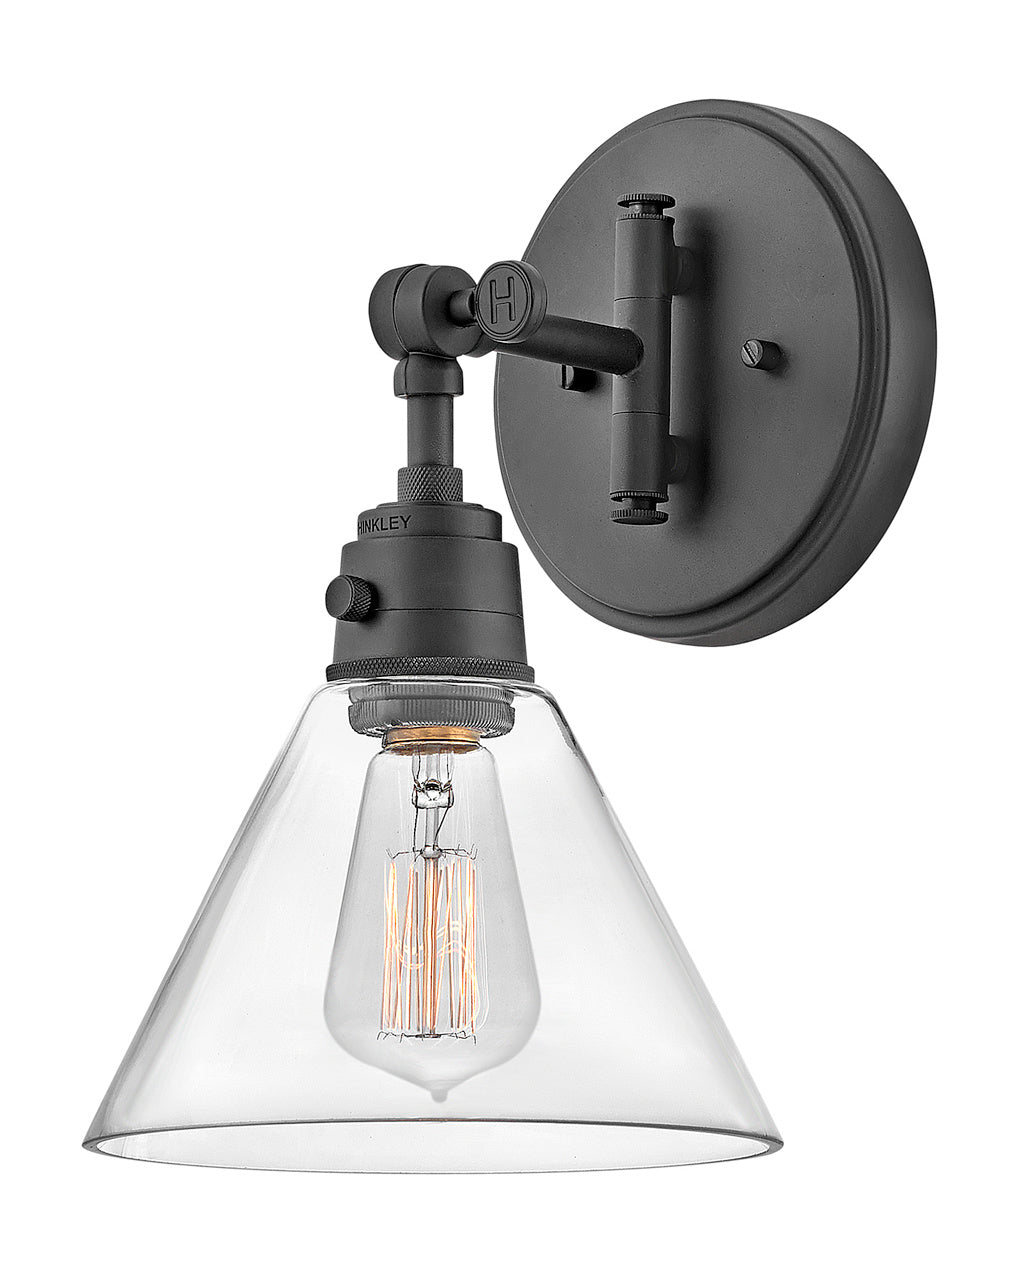 Hinkley Canada - LED Wall Sconce - Arti - Black with Clear glass- Union Lighting Luminaires Decor